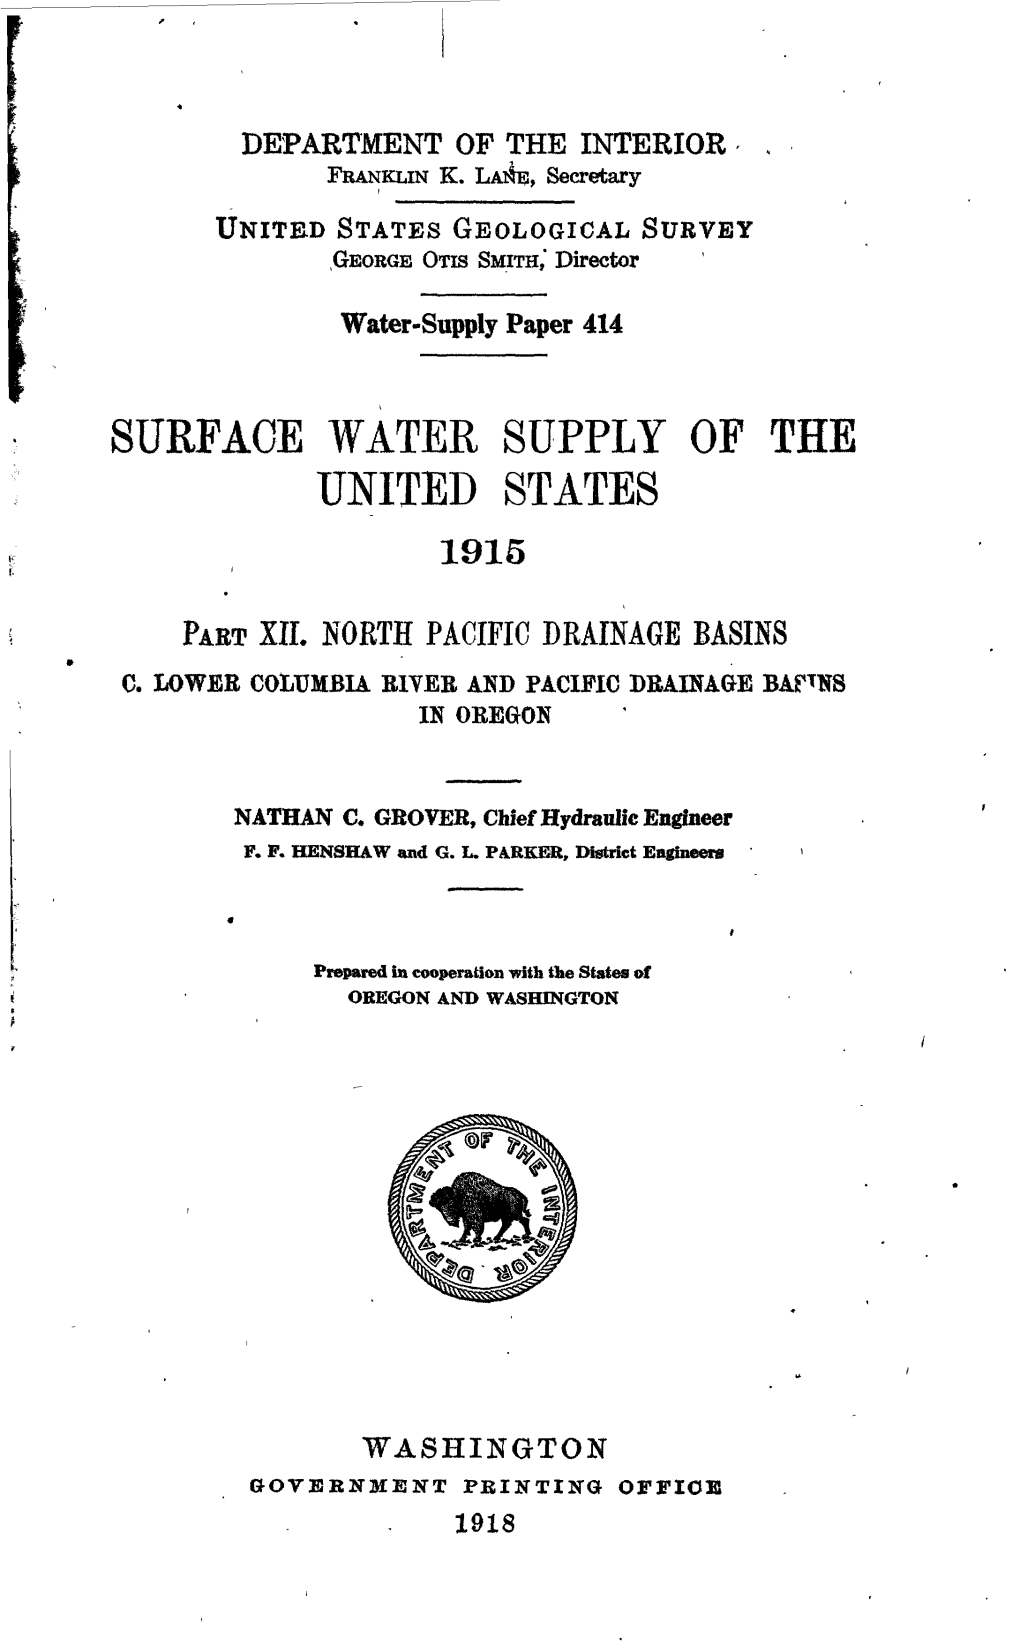 Surface Water Supply of the United States 1915